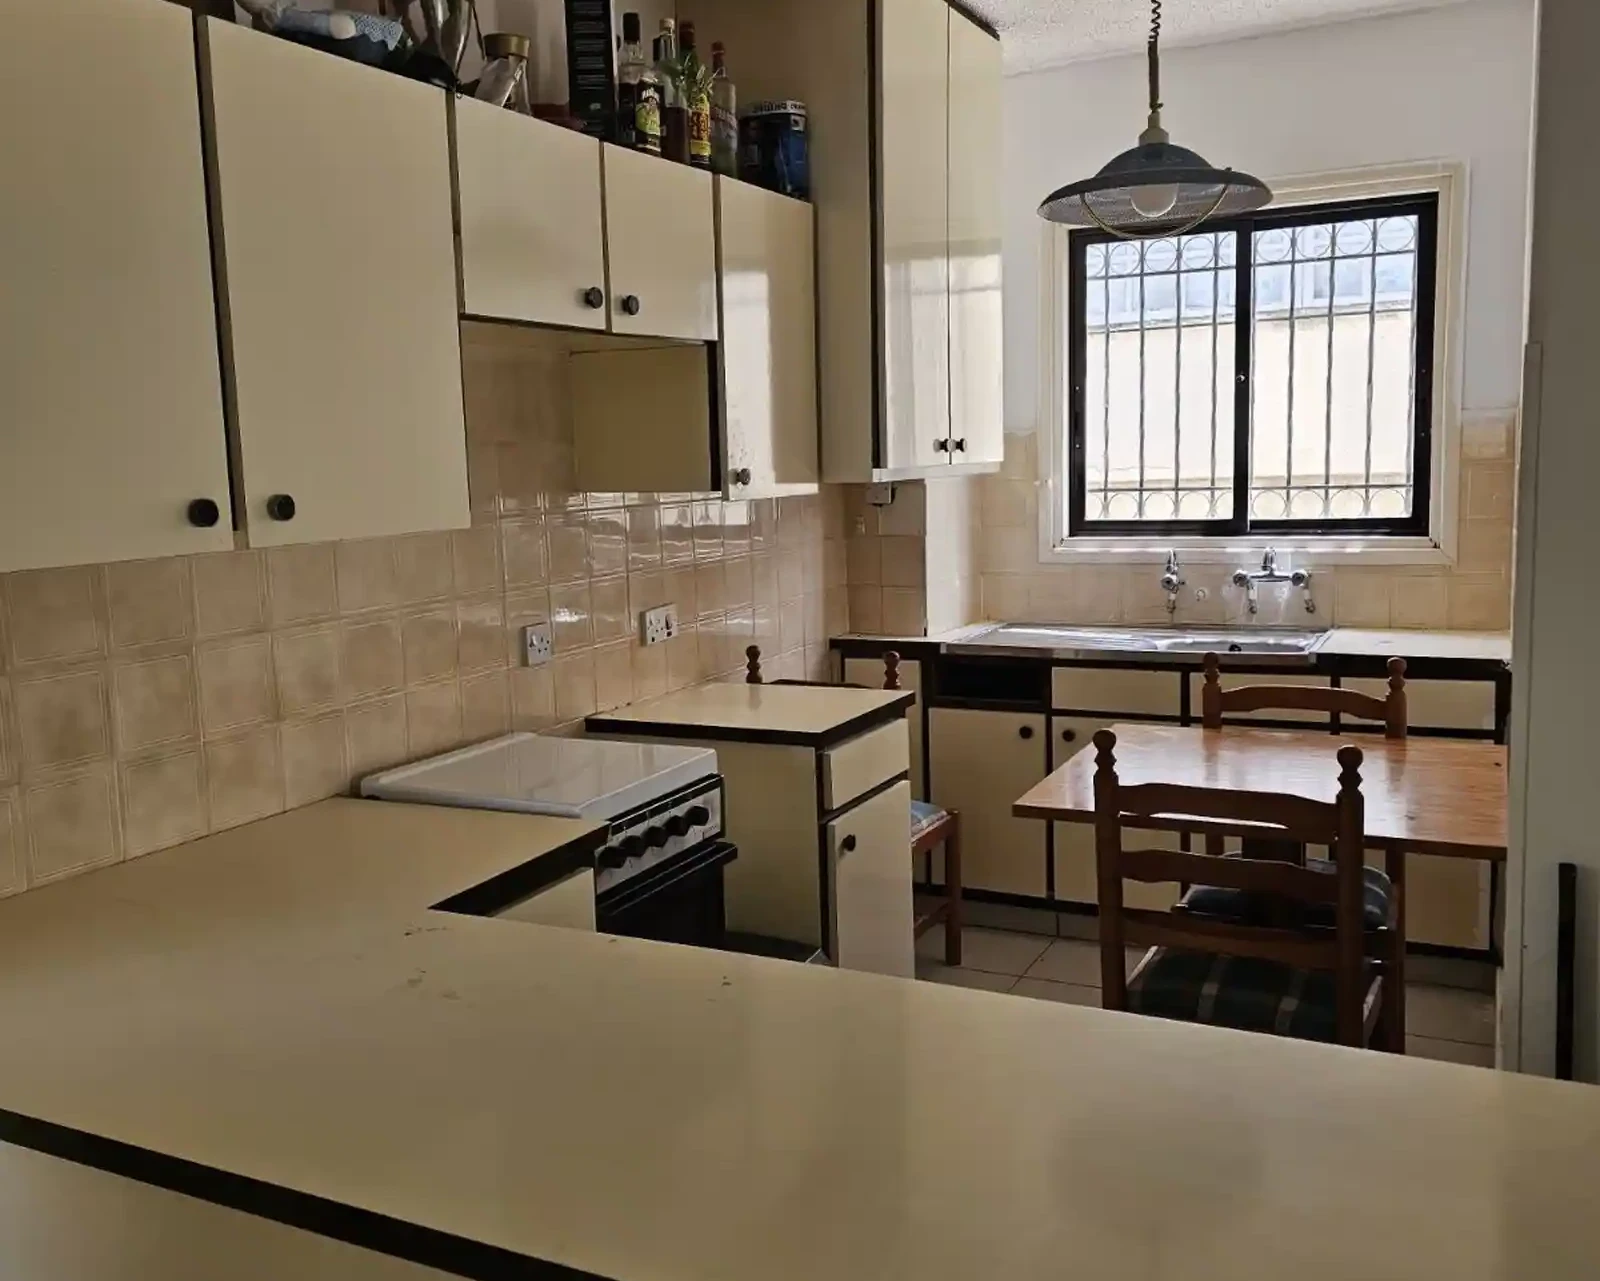 1-bedroom apartment fоr sаle €75.000, image 1